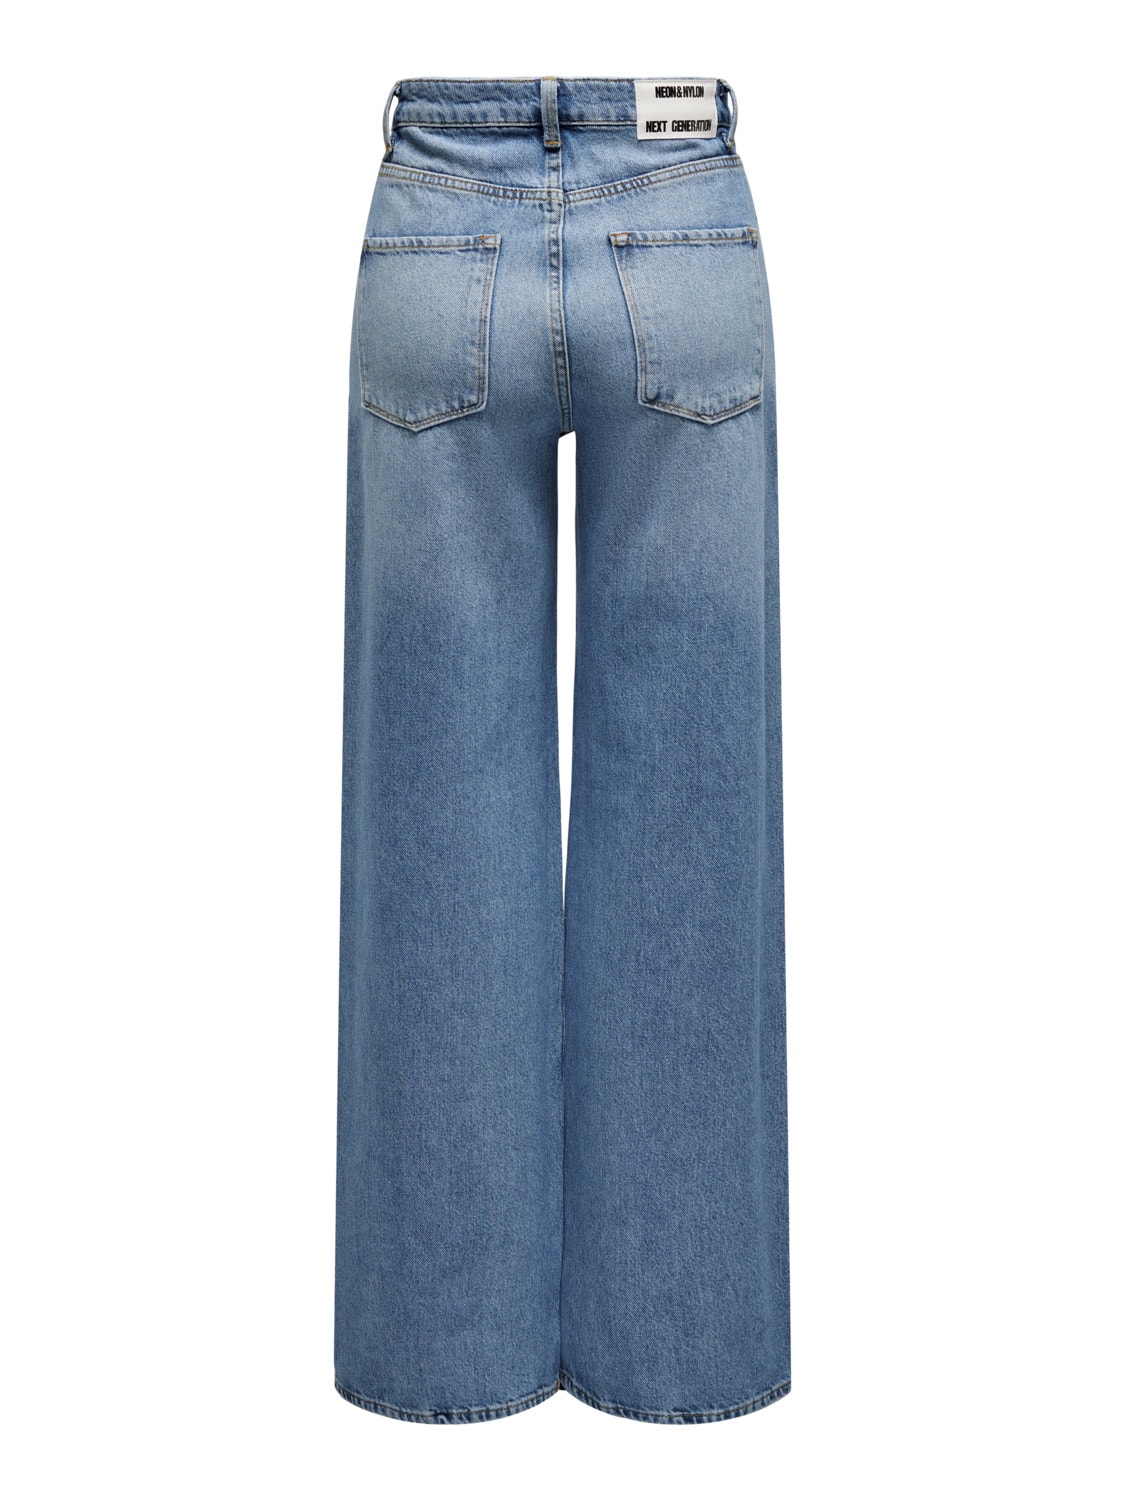 ONLY NEOCaro wide high waisted jeans -Light Blue Denim - 15267529